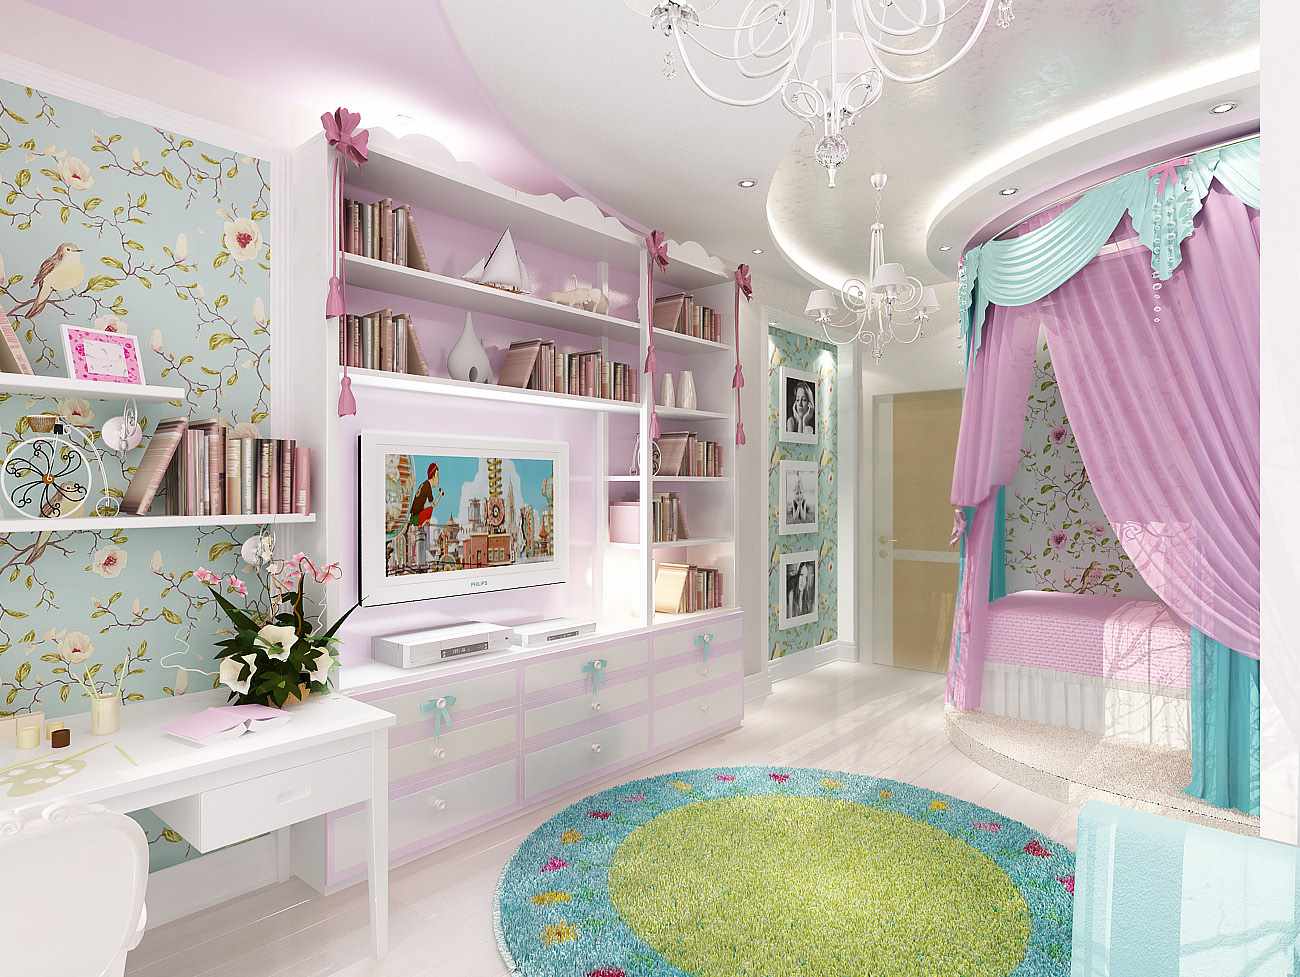 an example of a bright style of a children's room